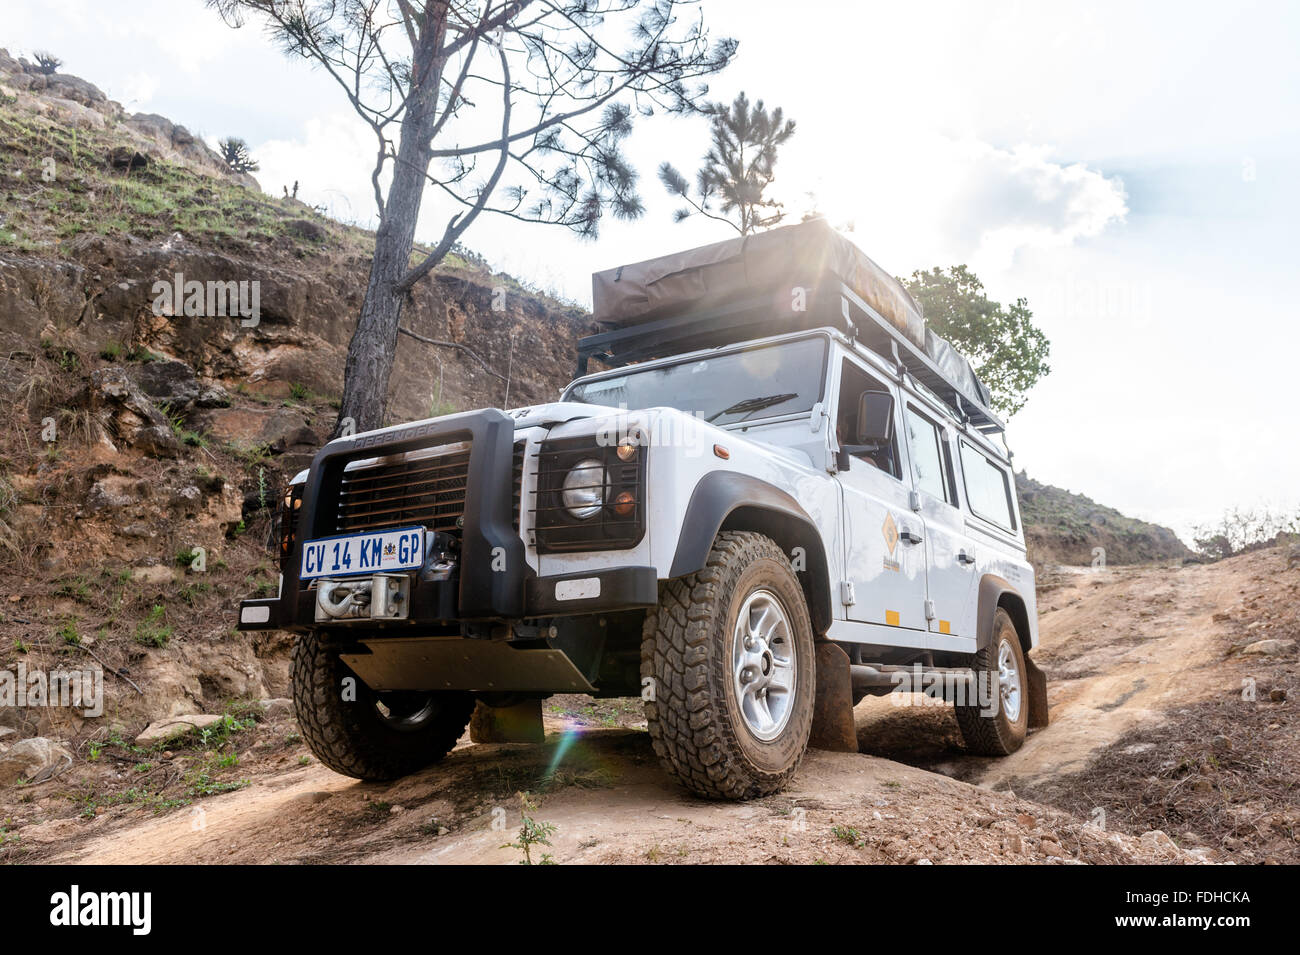 Landrover Defender parked on a dirt road in Mlilwane Wildlife Sanctuary in Swaziland, Africa. Stock Photo